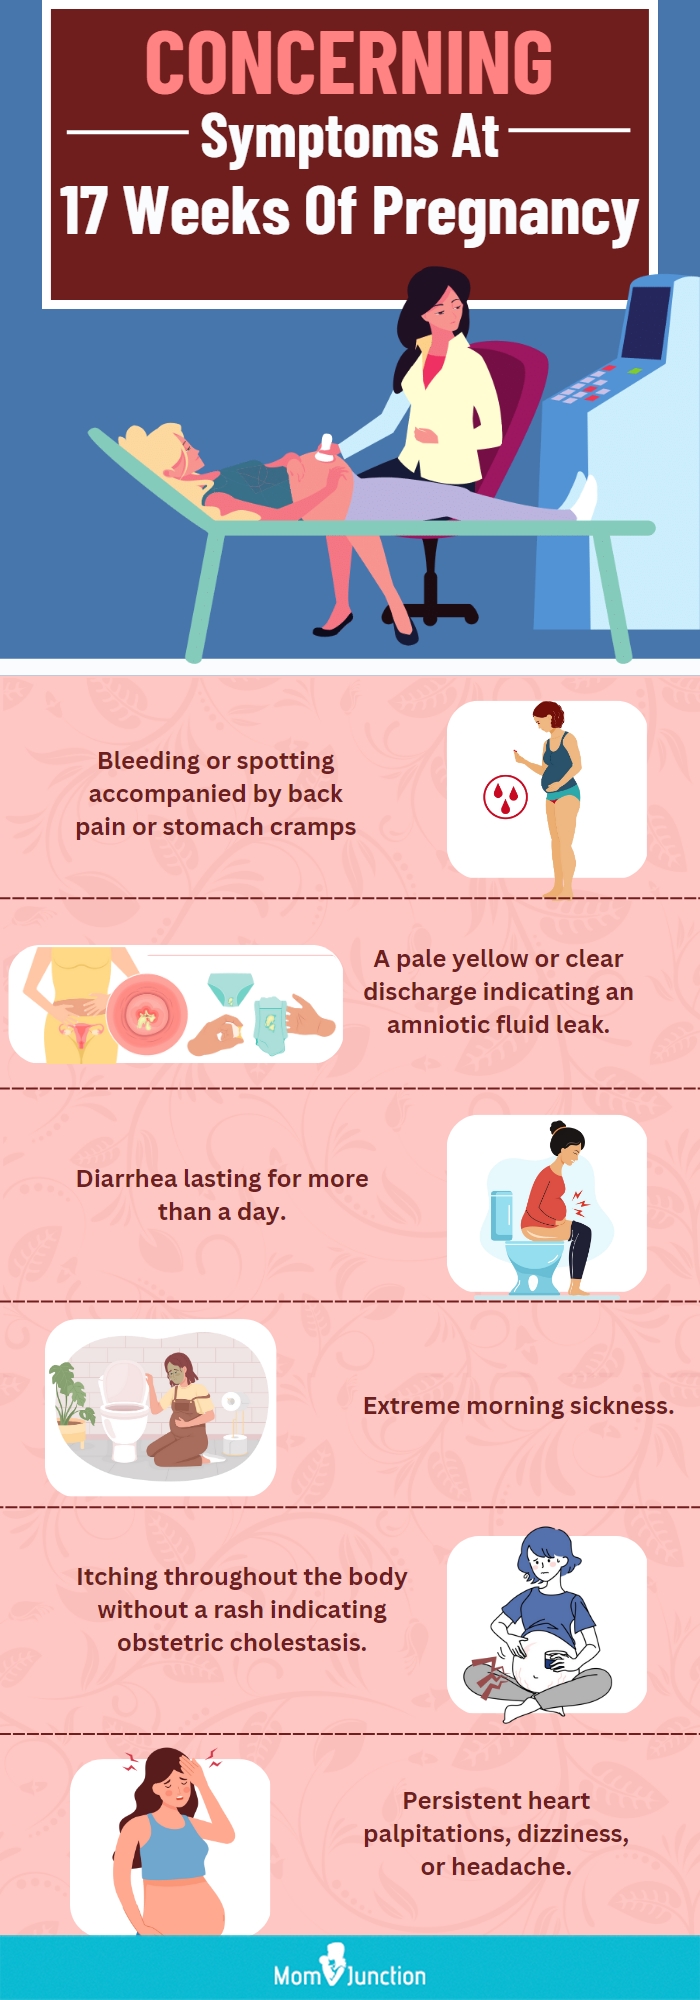 concerning symptoms at 17 weeks of pregnancy (infographic)